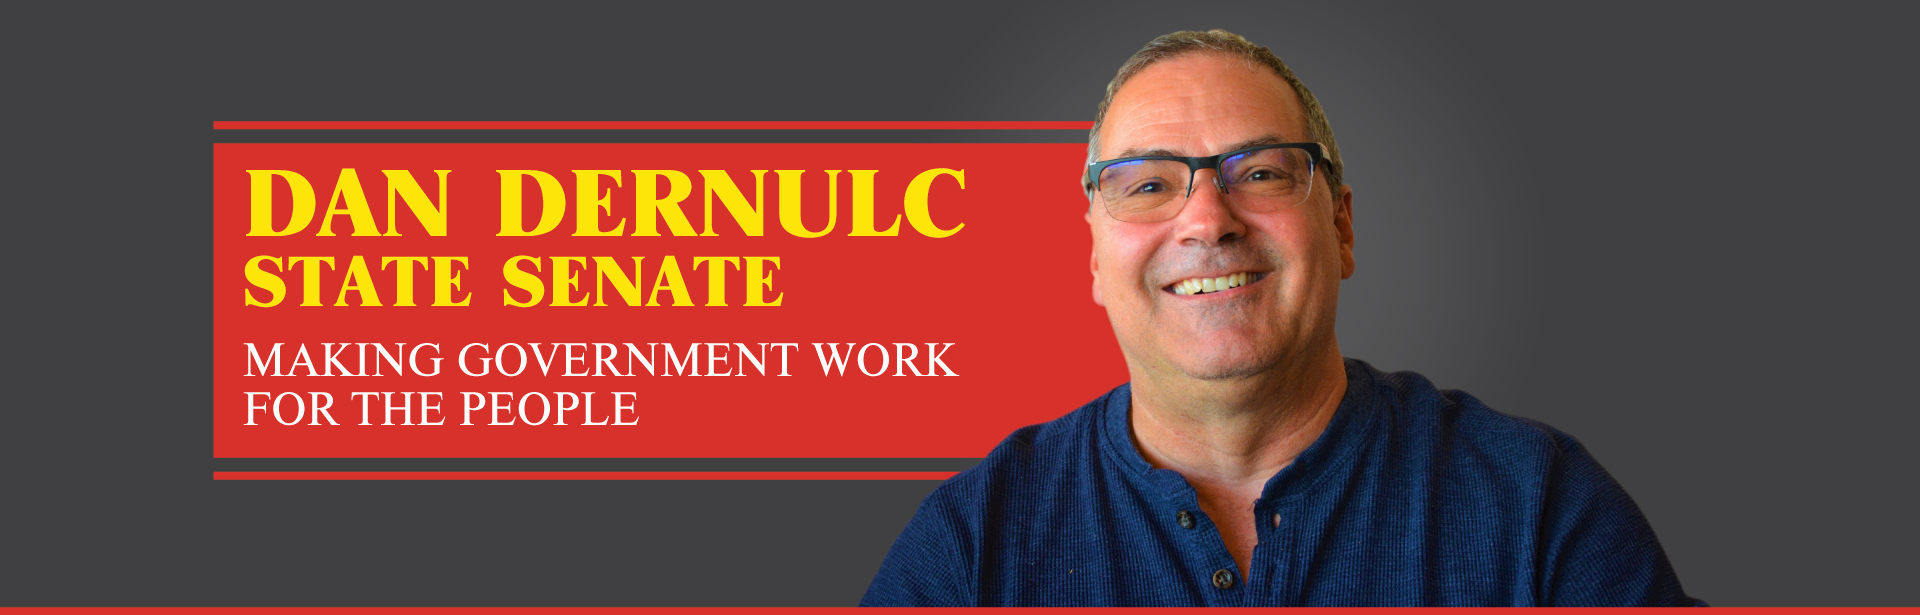 Dan Dernulc State Senate Making Government Work For The People